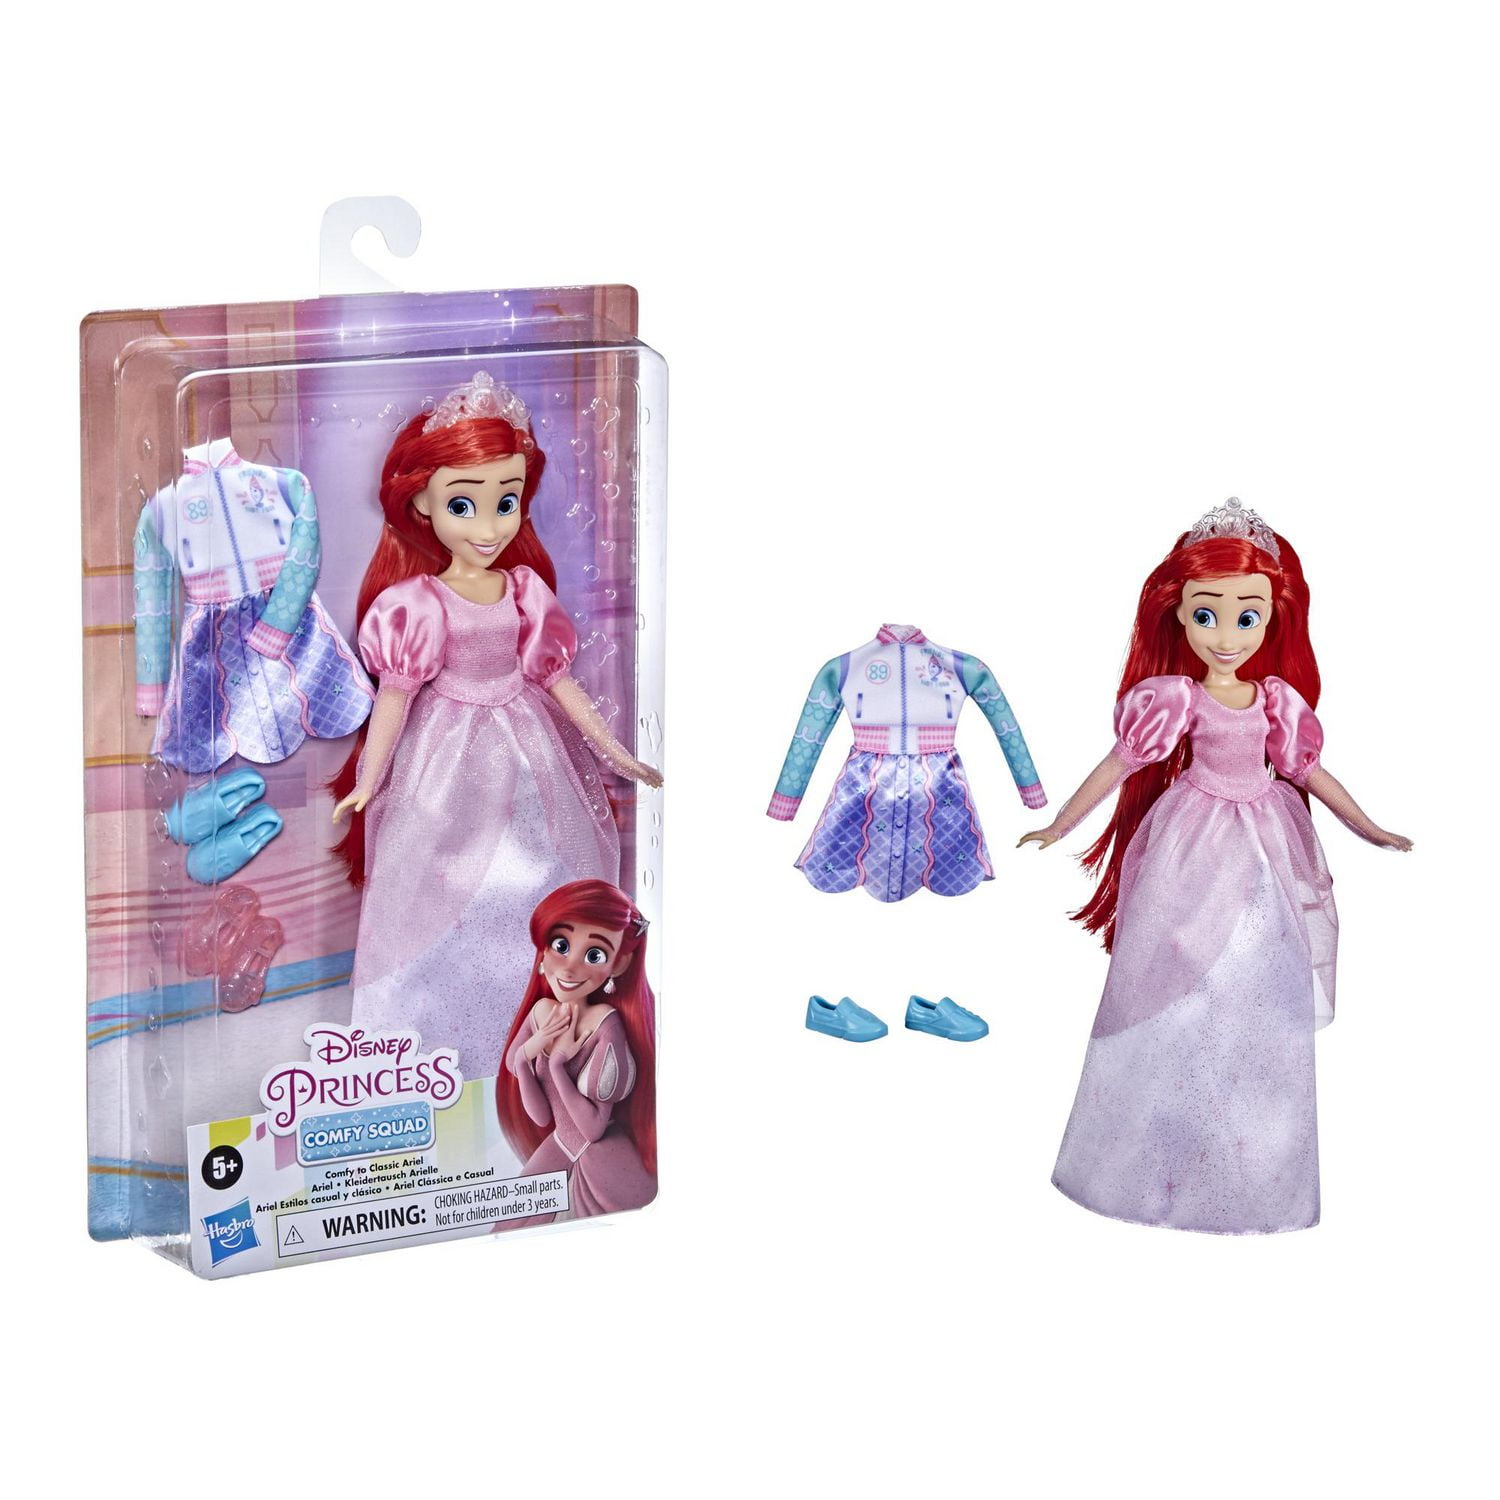 New Wave of Disney Princess Dolls from Mattel Available for Pre